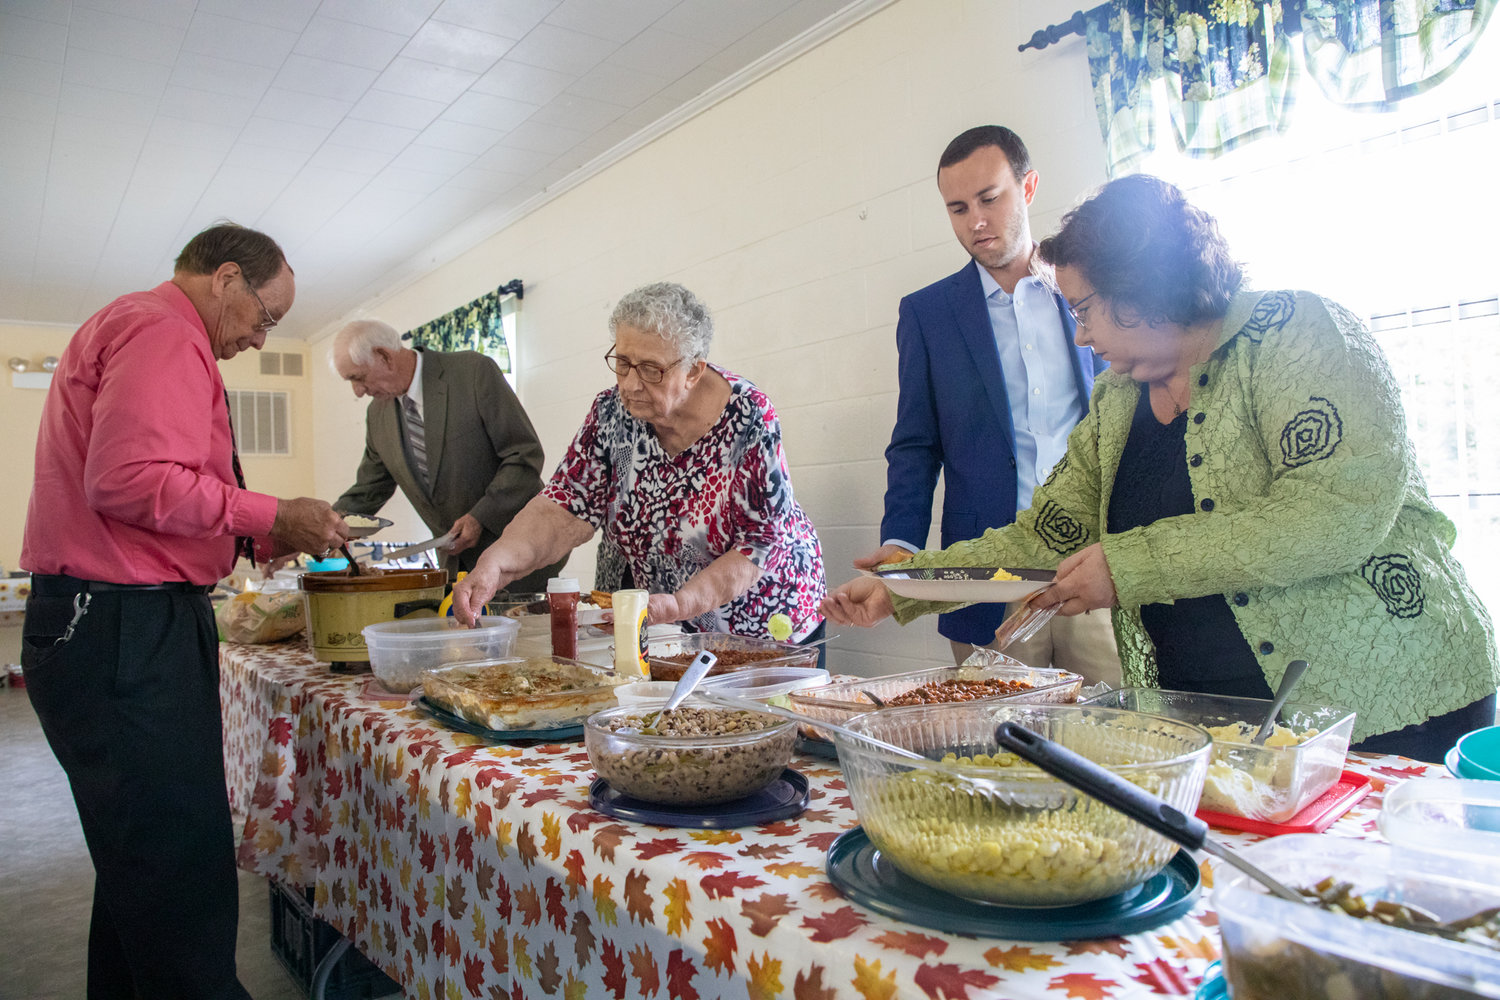 Members of Merry Oaks Baptist Church and their loved ones share in a Homecoming meal following the church service on Sept. 25.